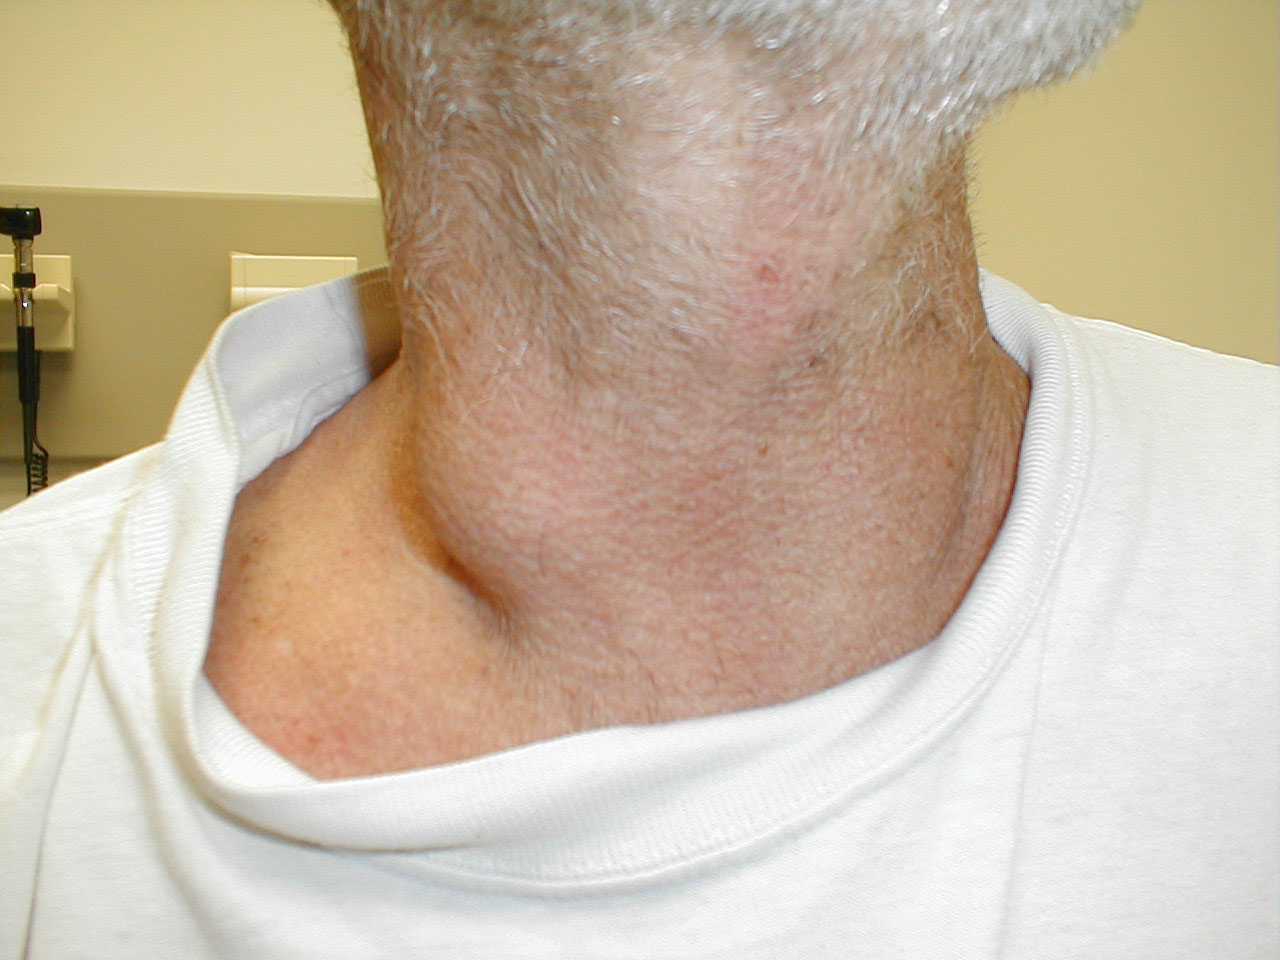 Cervical adenopathy: large right anterior cervical lymph node. Images Courtesy of Charlie Goldberg, M.D., UCSD School of Medicine and VA Medical Center, San Diego, CA.